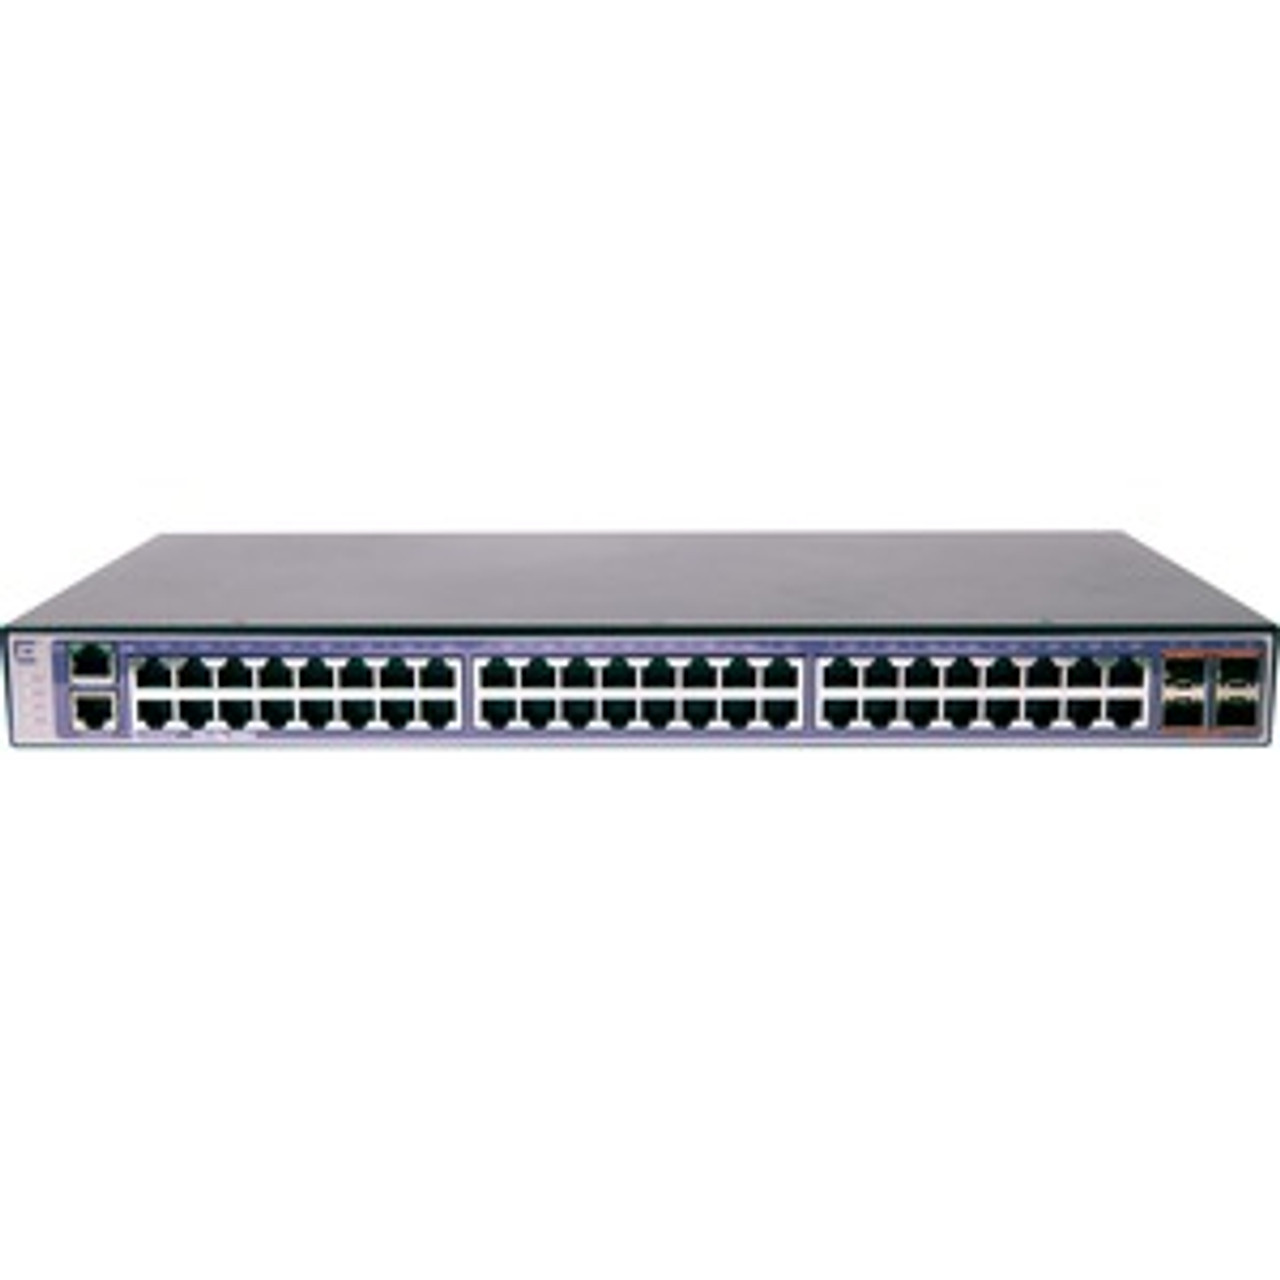 16565 Extreme Networks 220-48p-10GE4 Layer 3 Switch - 48 Ports - Manageable - 3 Layer Supported - Modular - Optical Fiber, Twisted Pair - Lifetime